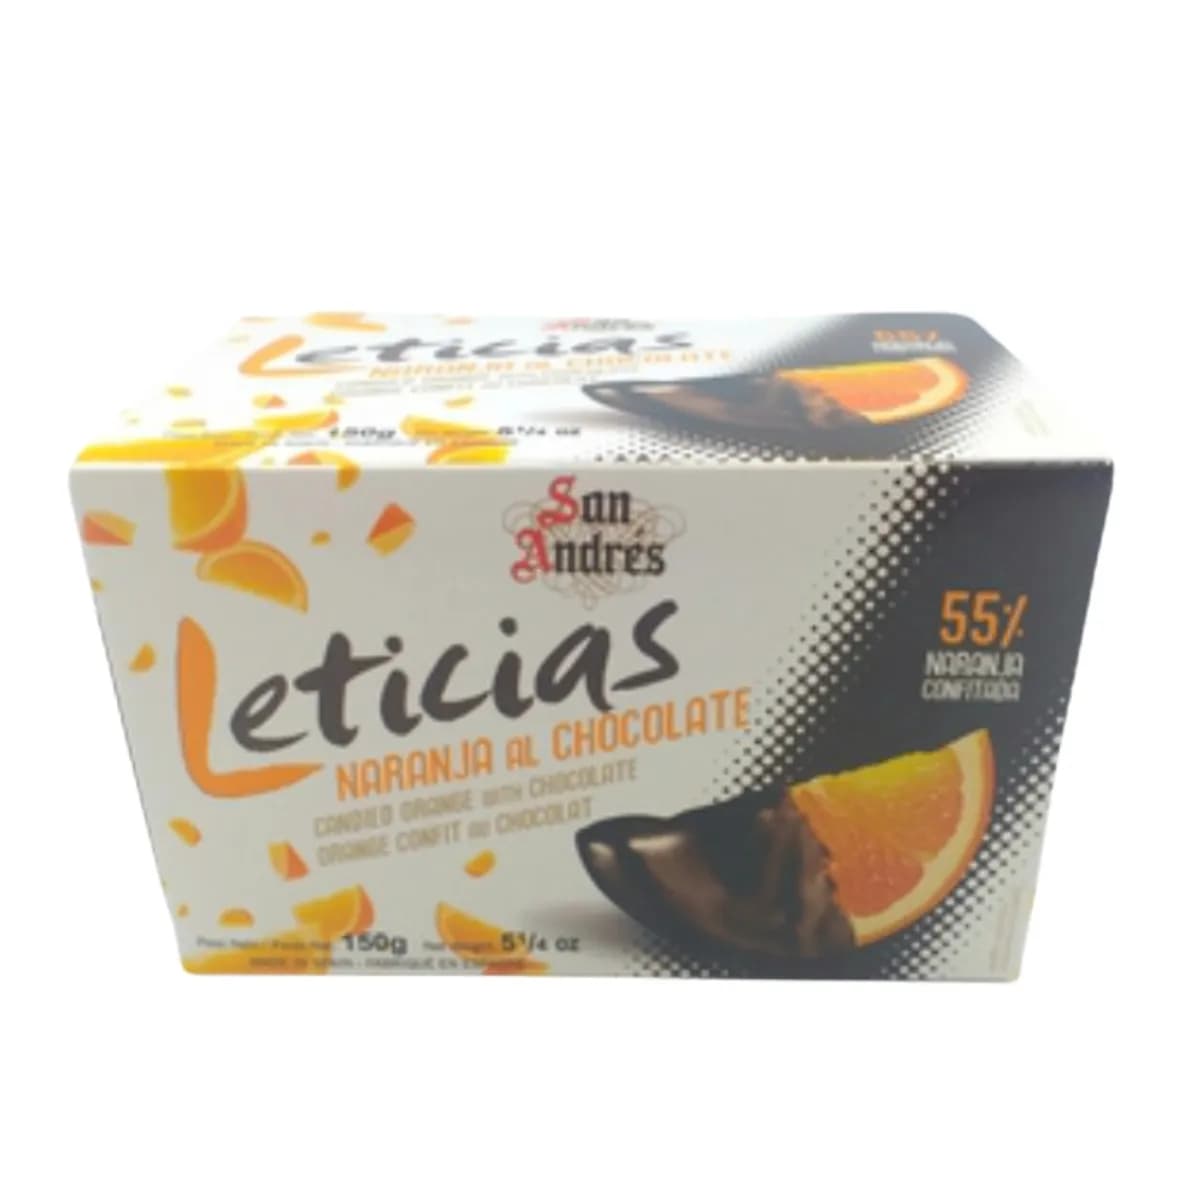 Sand Andres Leticias Chocolate Covered Orange Slices 150G